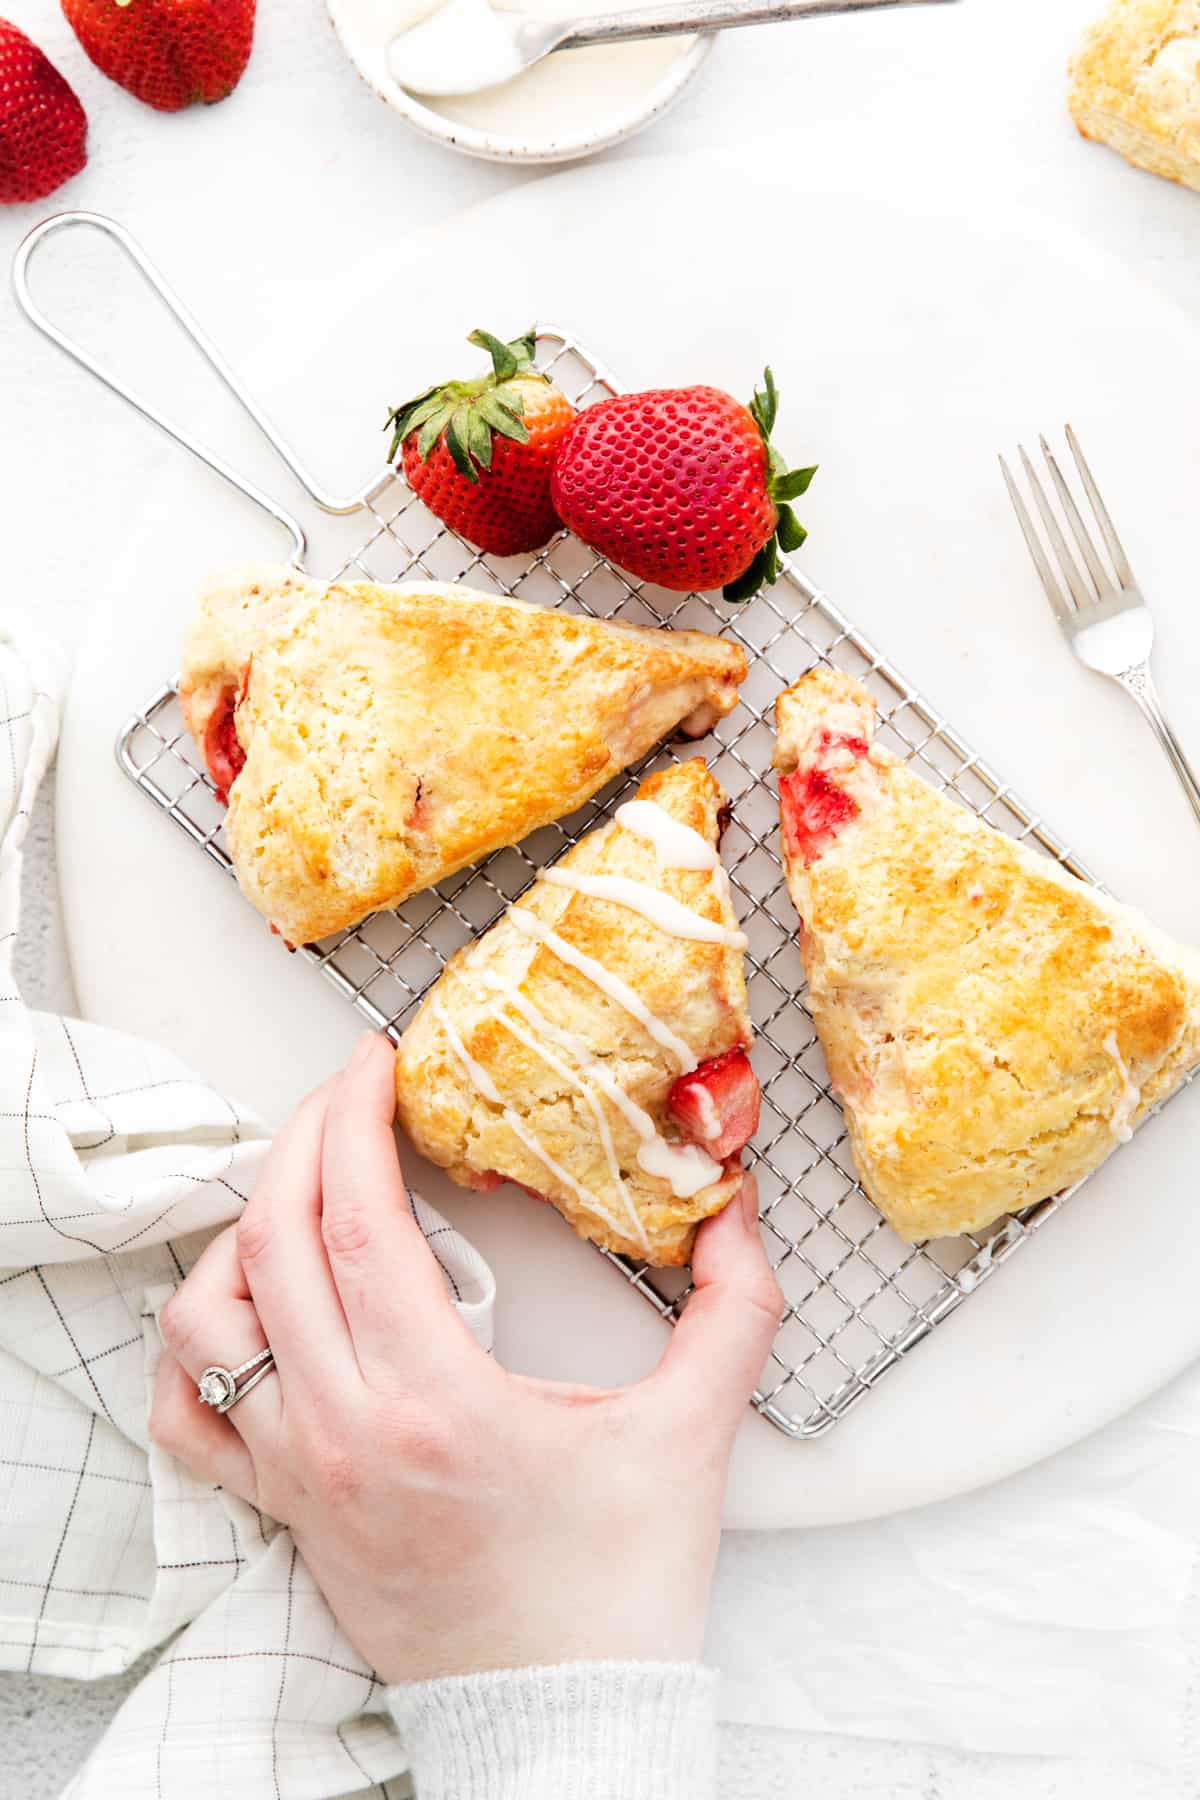 Woman's hand reaching to take a homemade strawberry scone. Scone is on wire holder with 2 other scones and 2 fresh strawberries. 